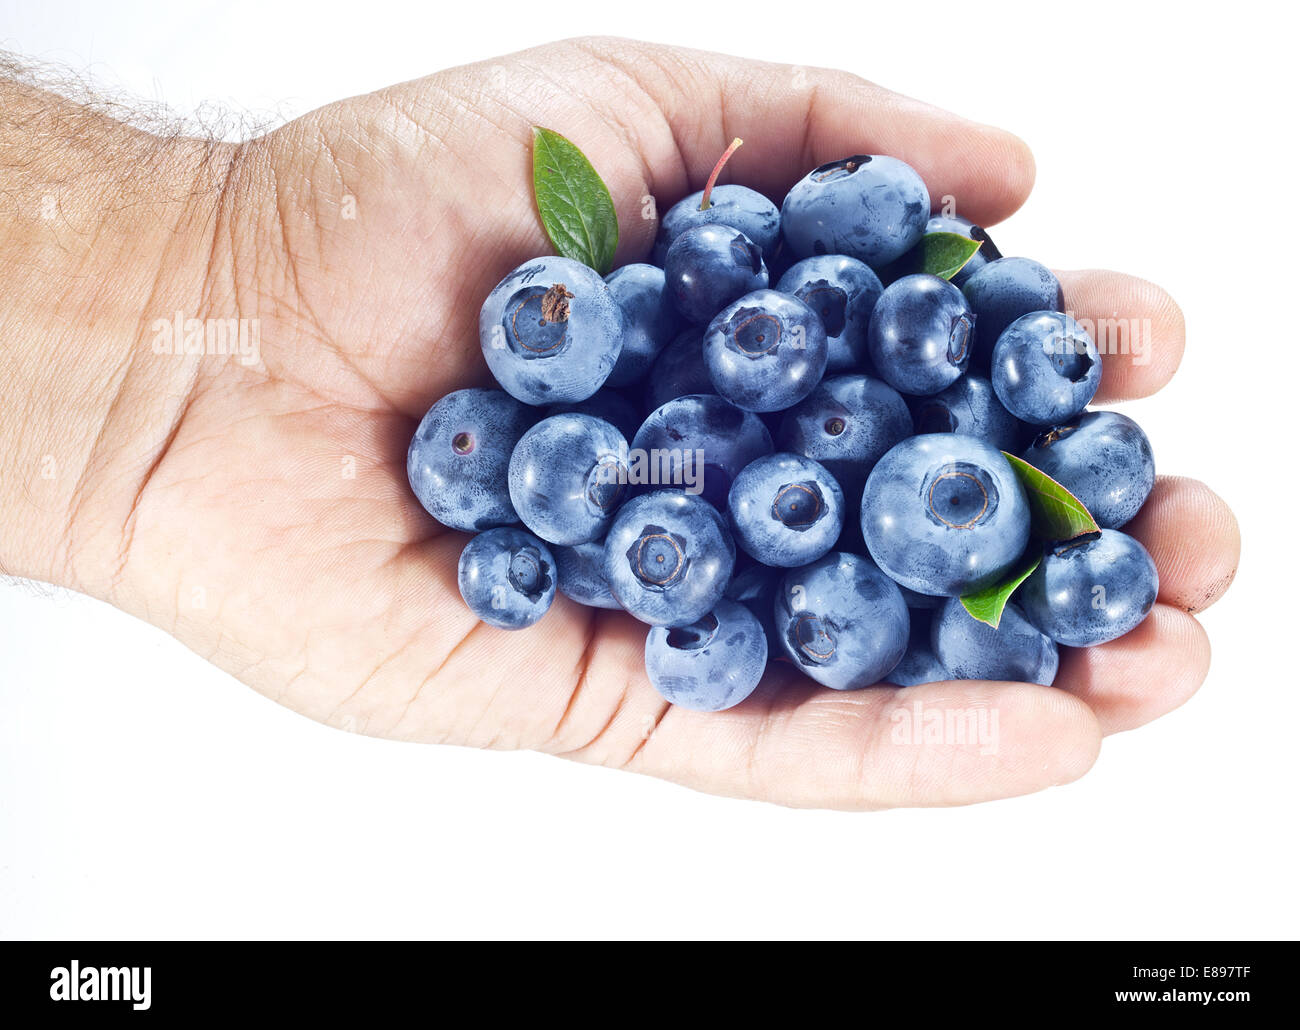 Blueberries in the man's hand over white. Stock Photo